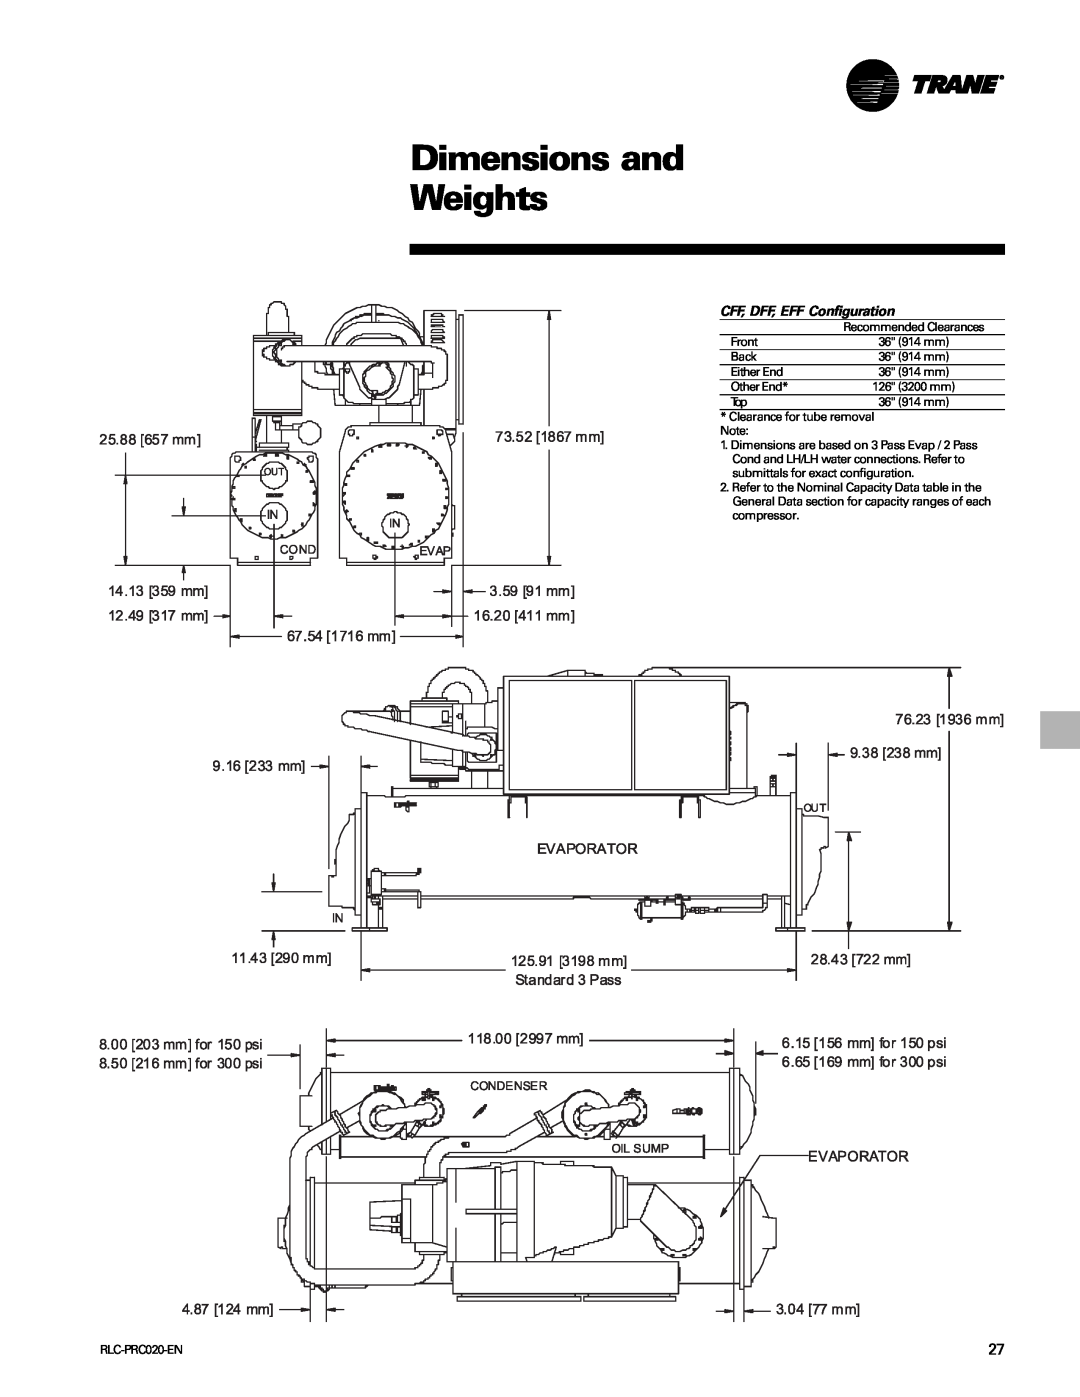 Trane RTHD manual Dimensions and Weights, CFF, DFF, EFF Configuration 